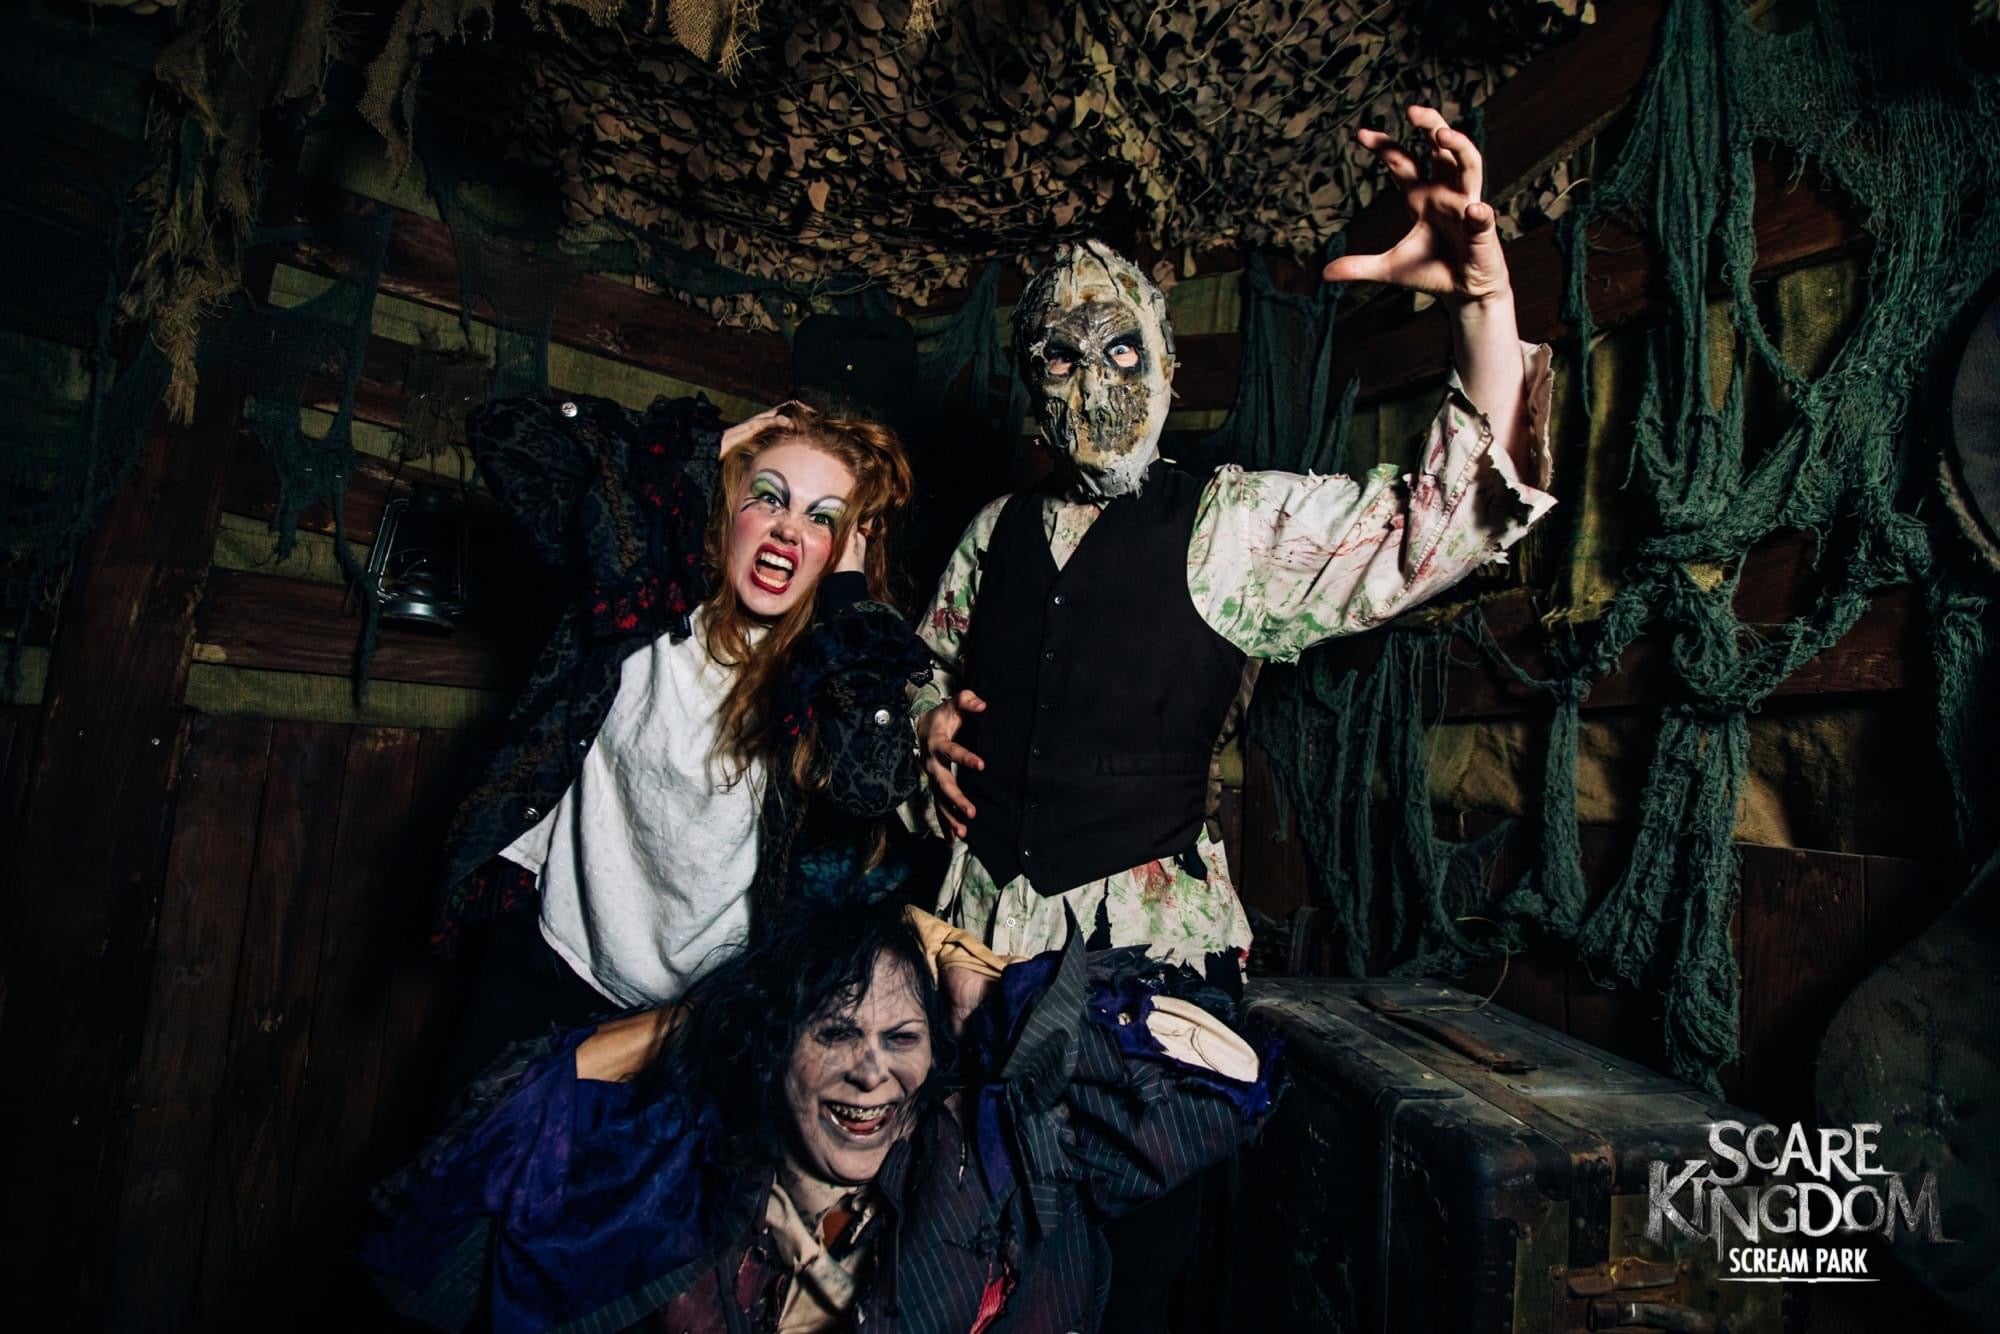 Three scare maze actors pose together with masks obscuring their faces in dark lighting 